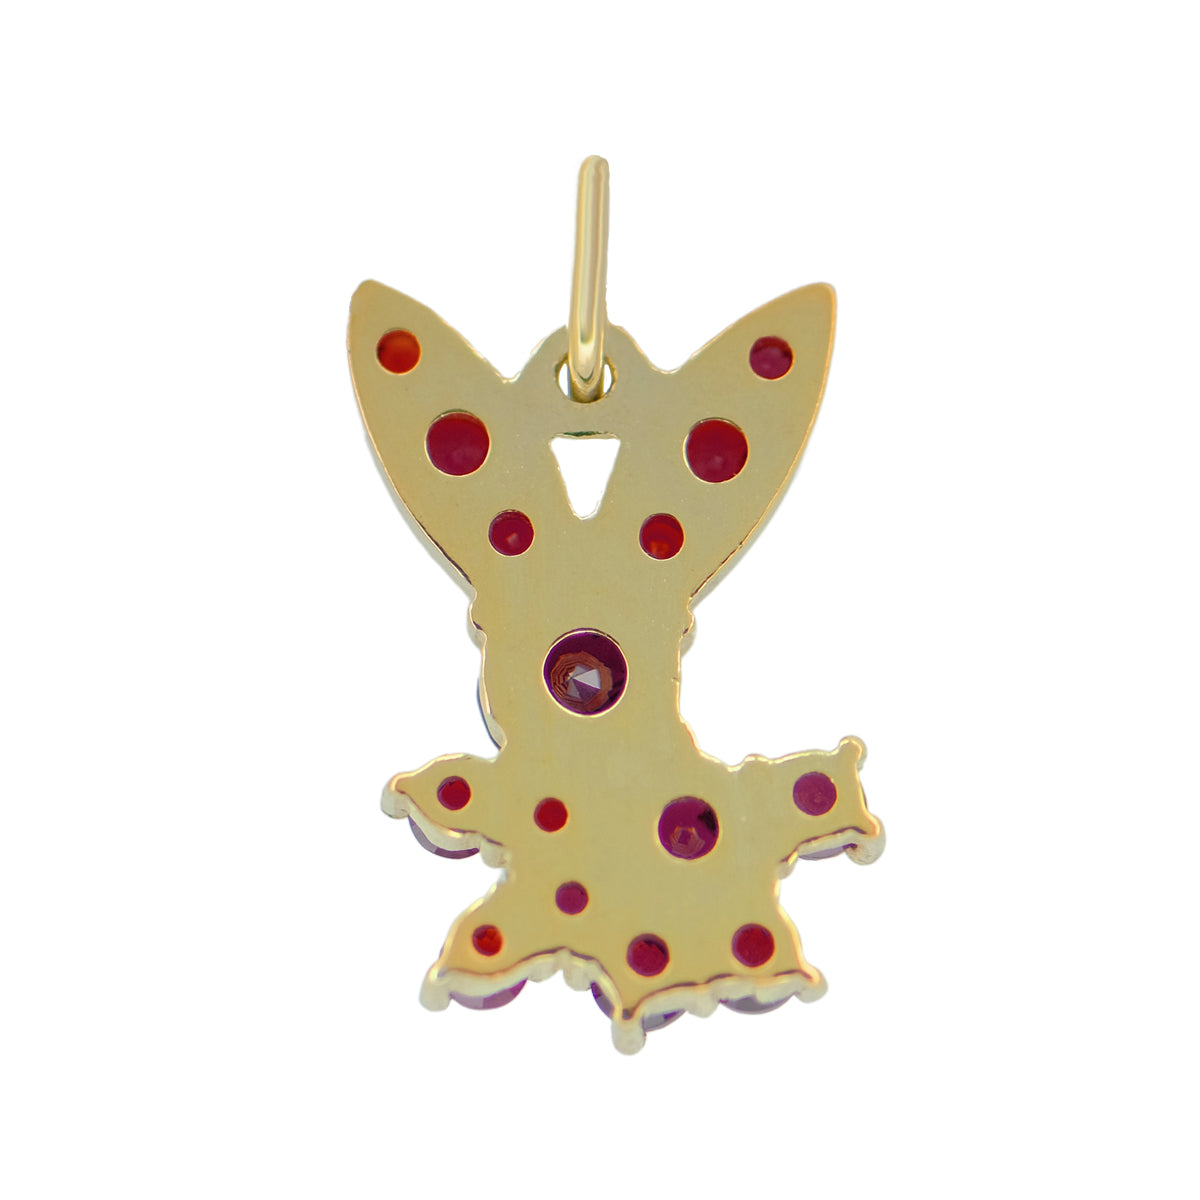 Bohemian Red Garnet Bunny Rabbit Pendant in Sterling Silver and Yellow Gold Vermeil - Item: C792 - Image: 2